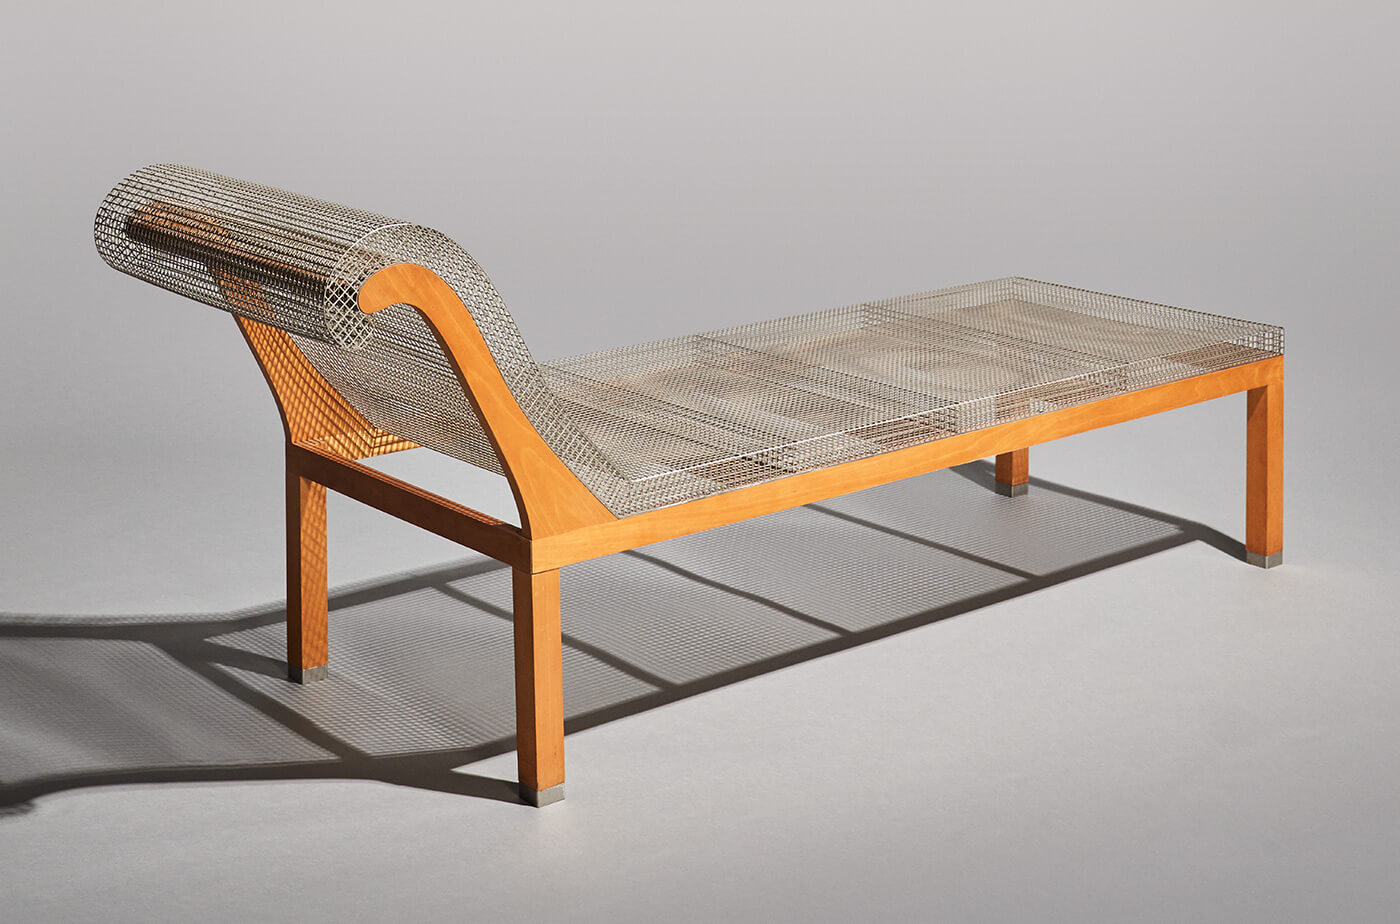 ‘Parzival Sofa’, 1987 by Adrian Madlener